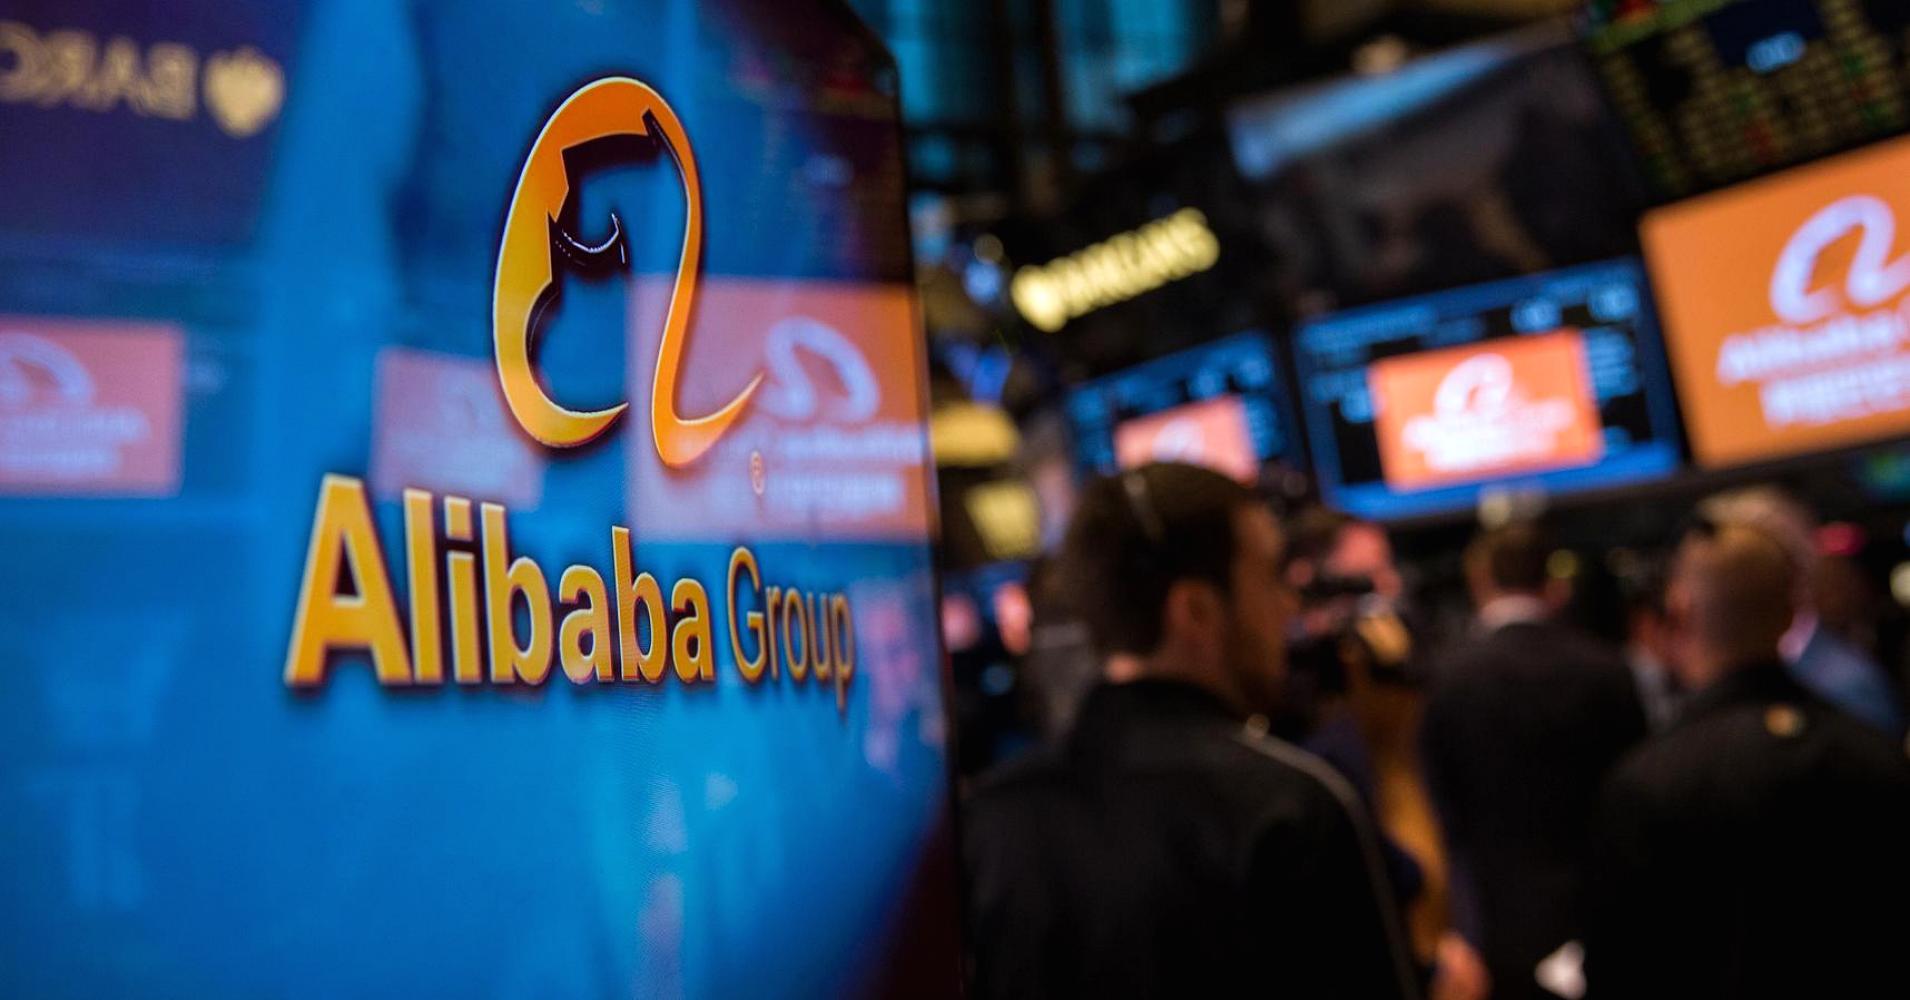 Alibaba and Tencent climb ranks of top Asian earners during pandemic